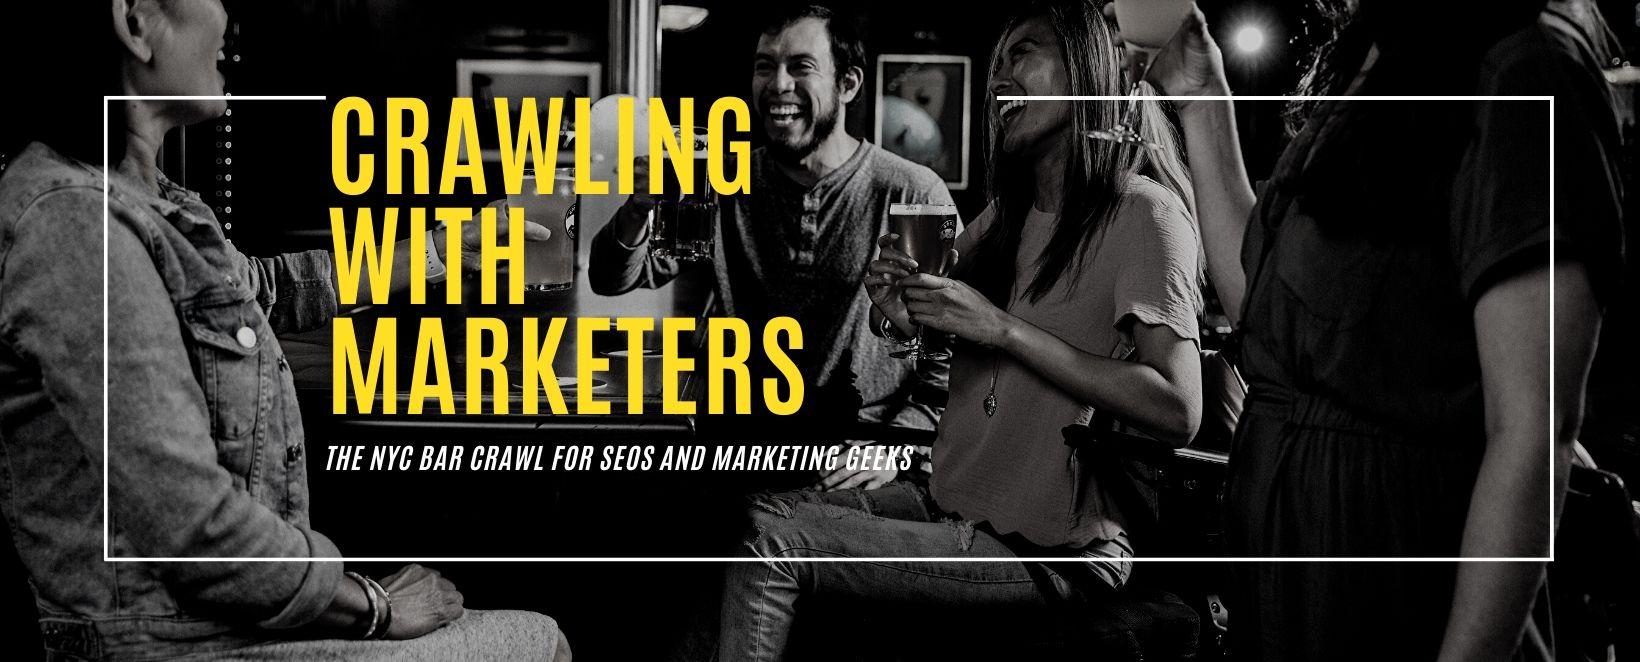 Crawling With Marketers: The NYC Bar Crawl For SEOs and Marketing Geeks